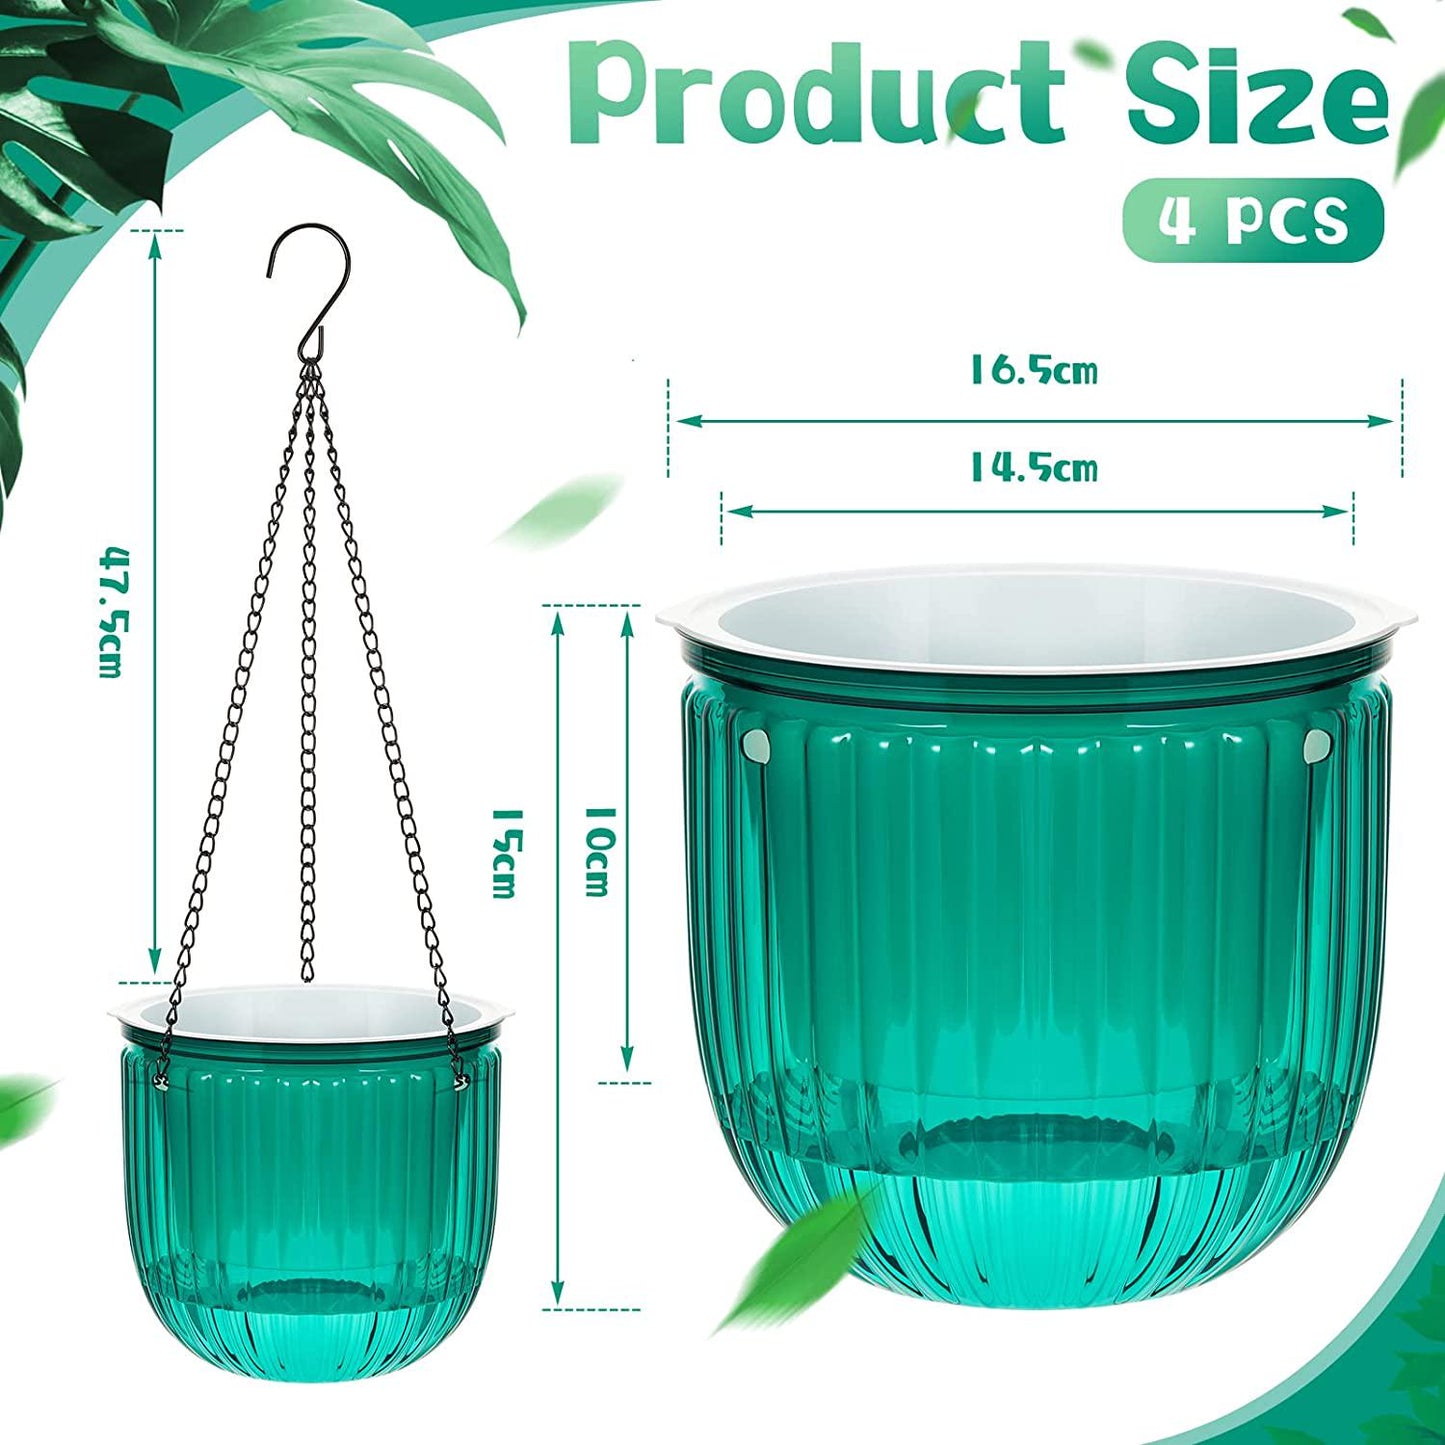 Meanplan 4 Pcs Self Watering Hanging Planter Indoor 6.5 Inch Hanging Baskets for Plants Outdoor Plastic Hanging Flower Pot with 3 Hooks Chains Drainage Holes for Garden Home, Medium Size (Emerald)